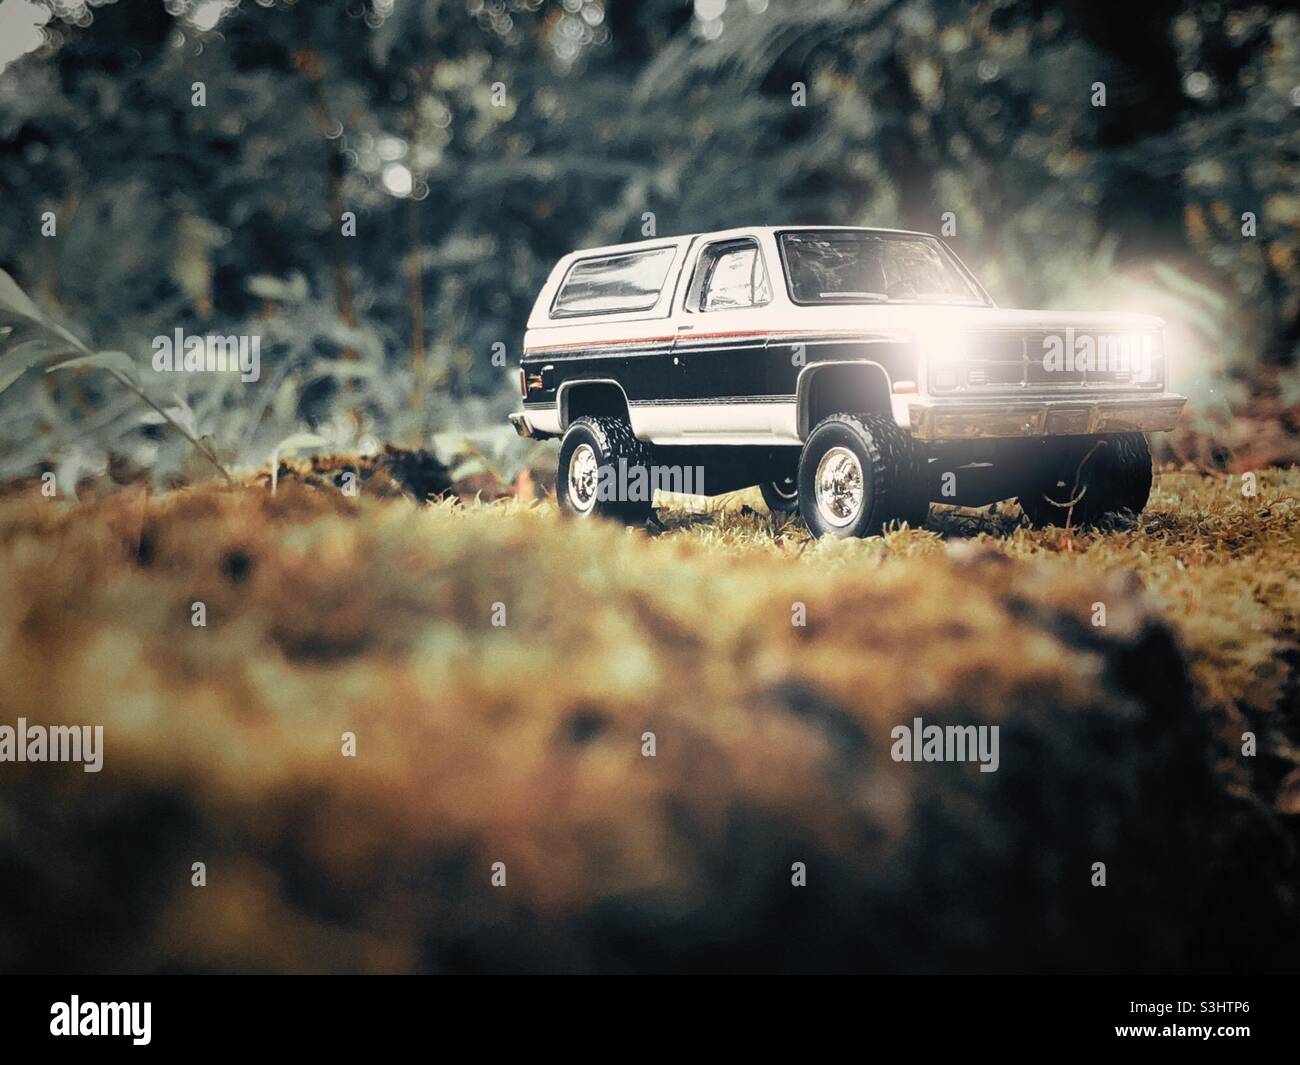 Small toy 4x4 SUV on a moss covered cinder block. Headlight illumination added in post processing. Stock Photo